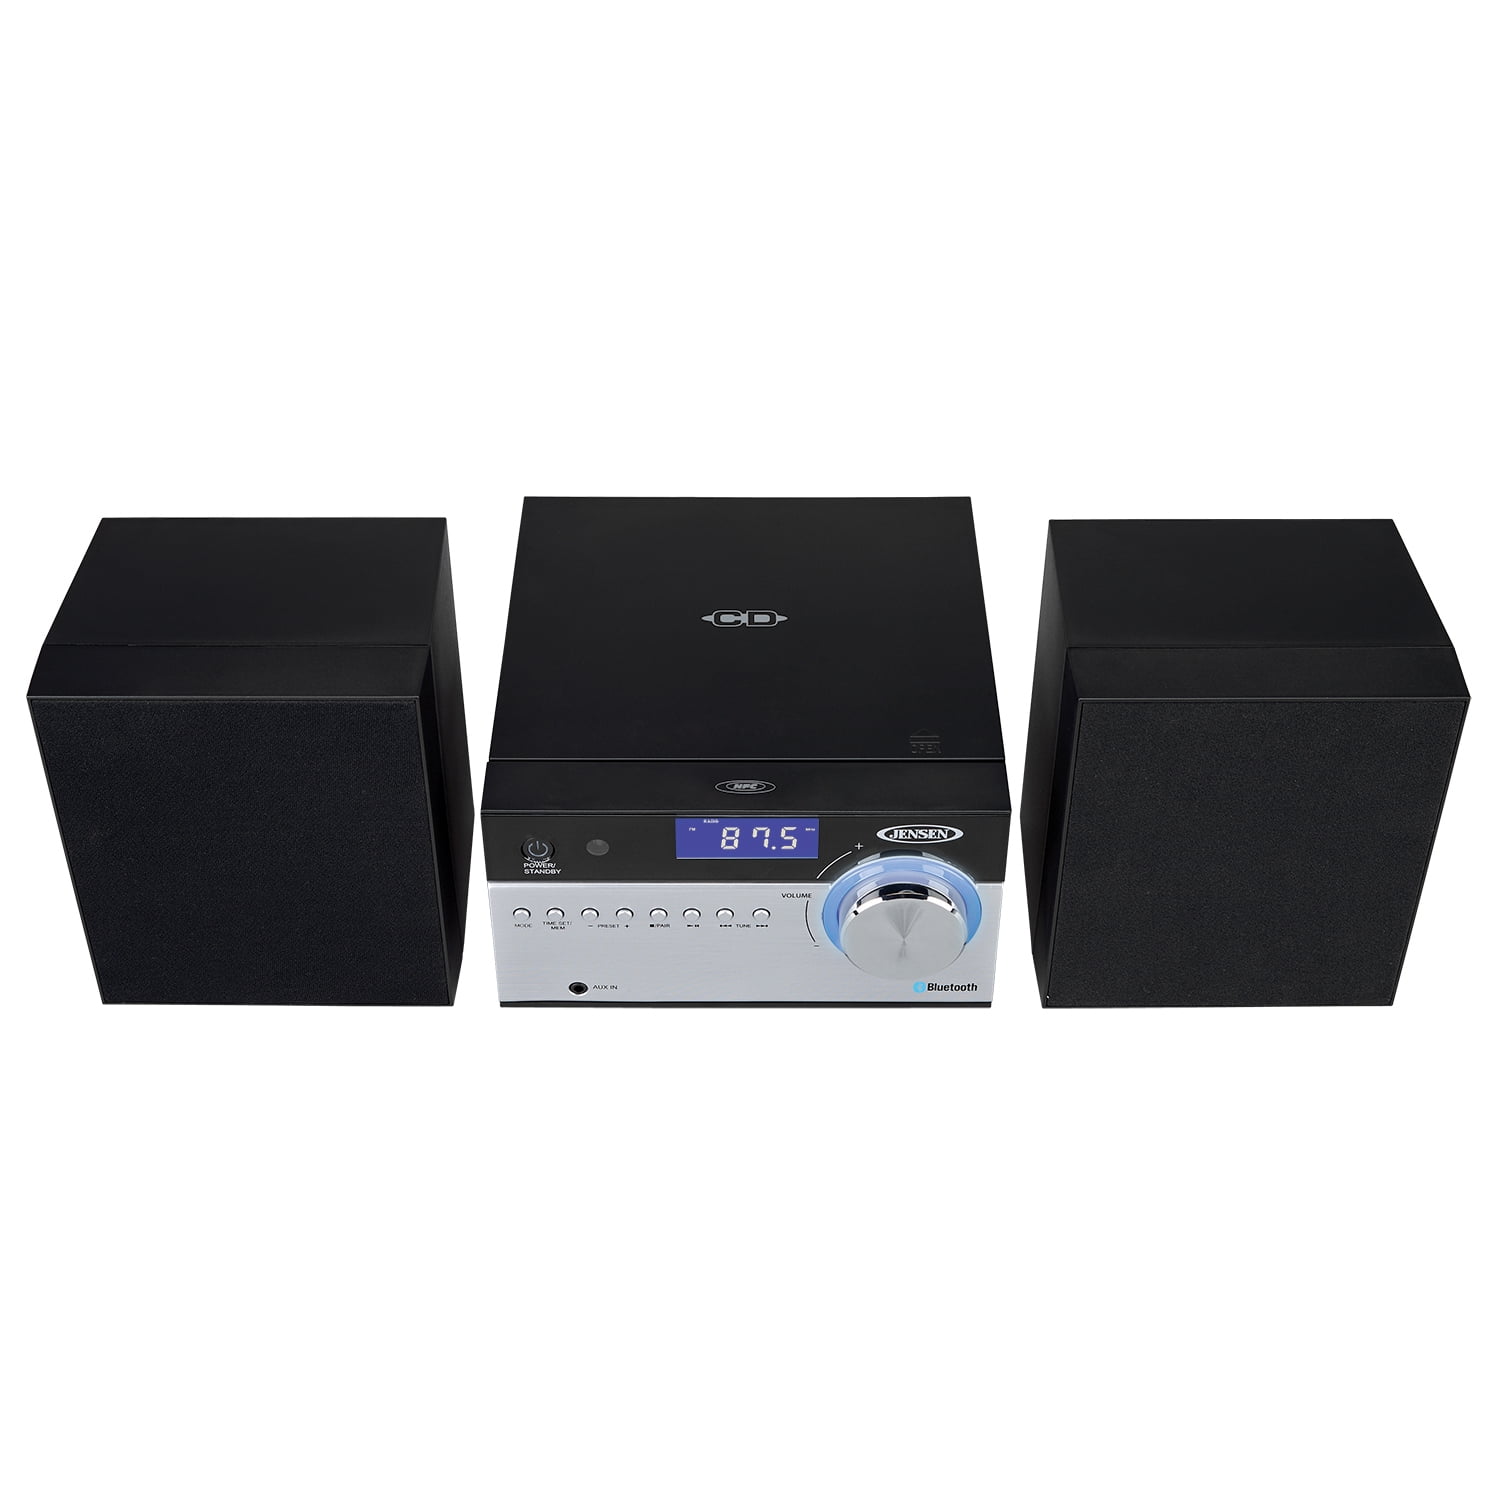 Jensen JBS-200 Bluetooth CD Music System with Digital AM/FM Stereo Receiver and Remote Control 2 